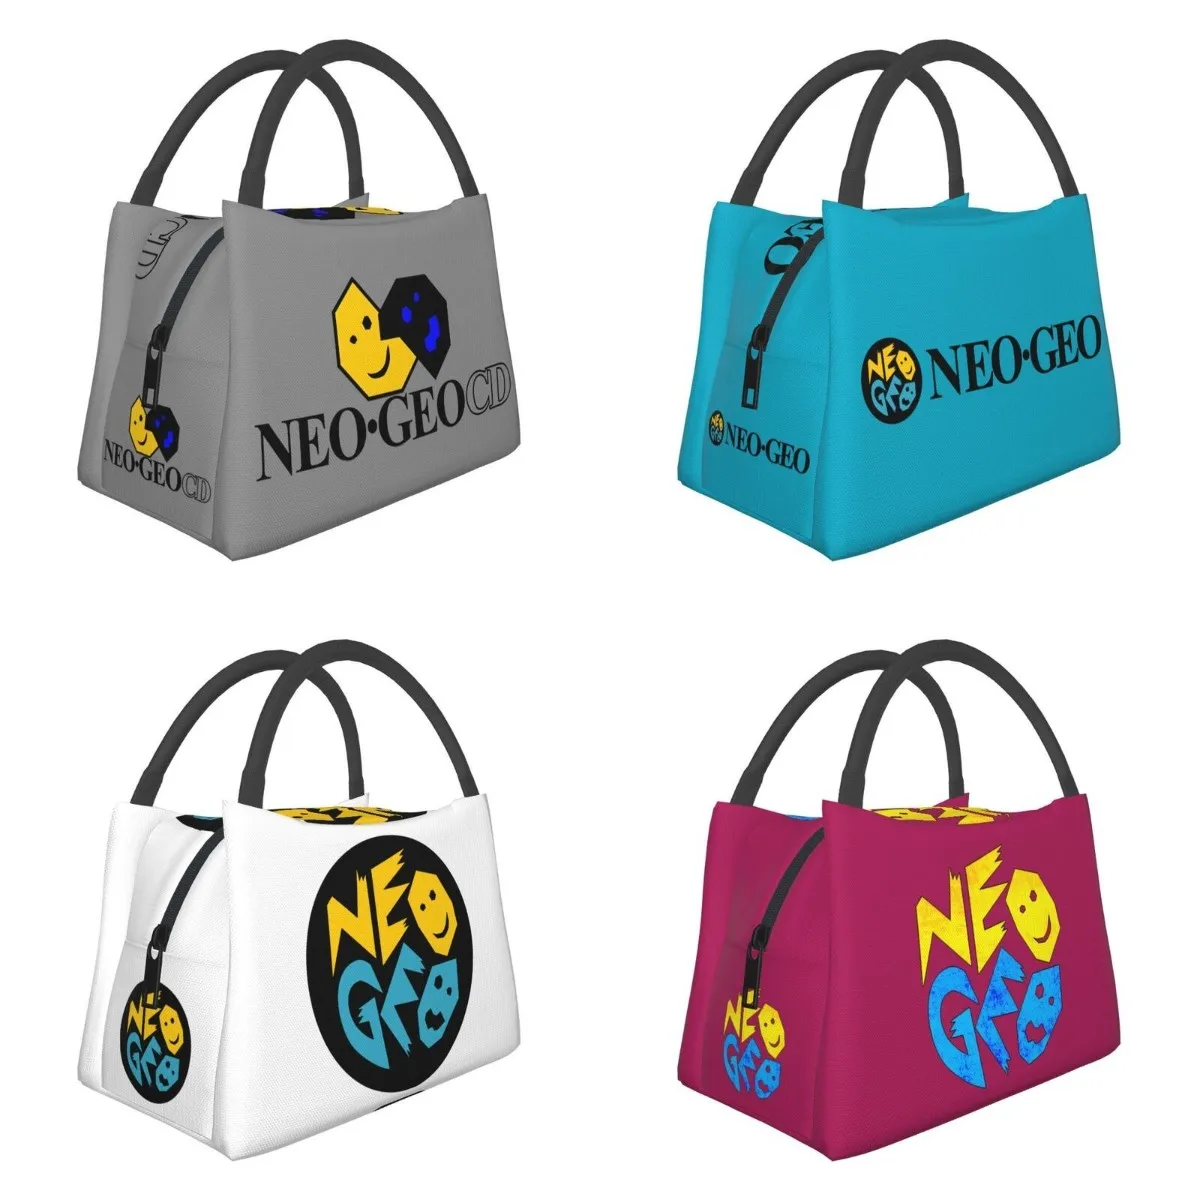 

Neo Geo Logo Resuable Lunch Box for Neogeo Arcade Game Cooler Thermal Food Insulated Lunch Bag Travel Work Pinic Container